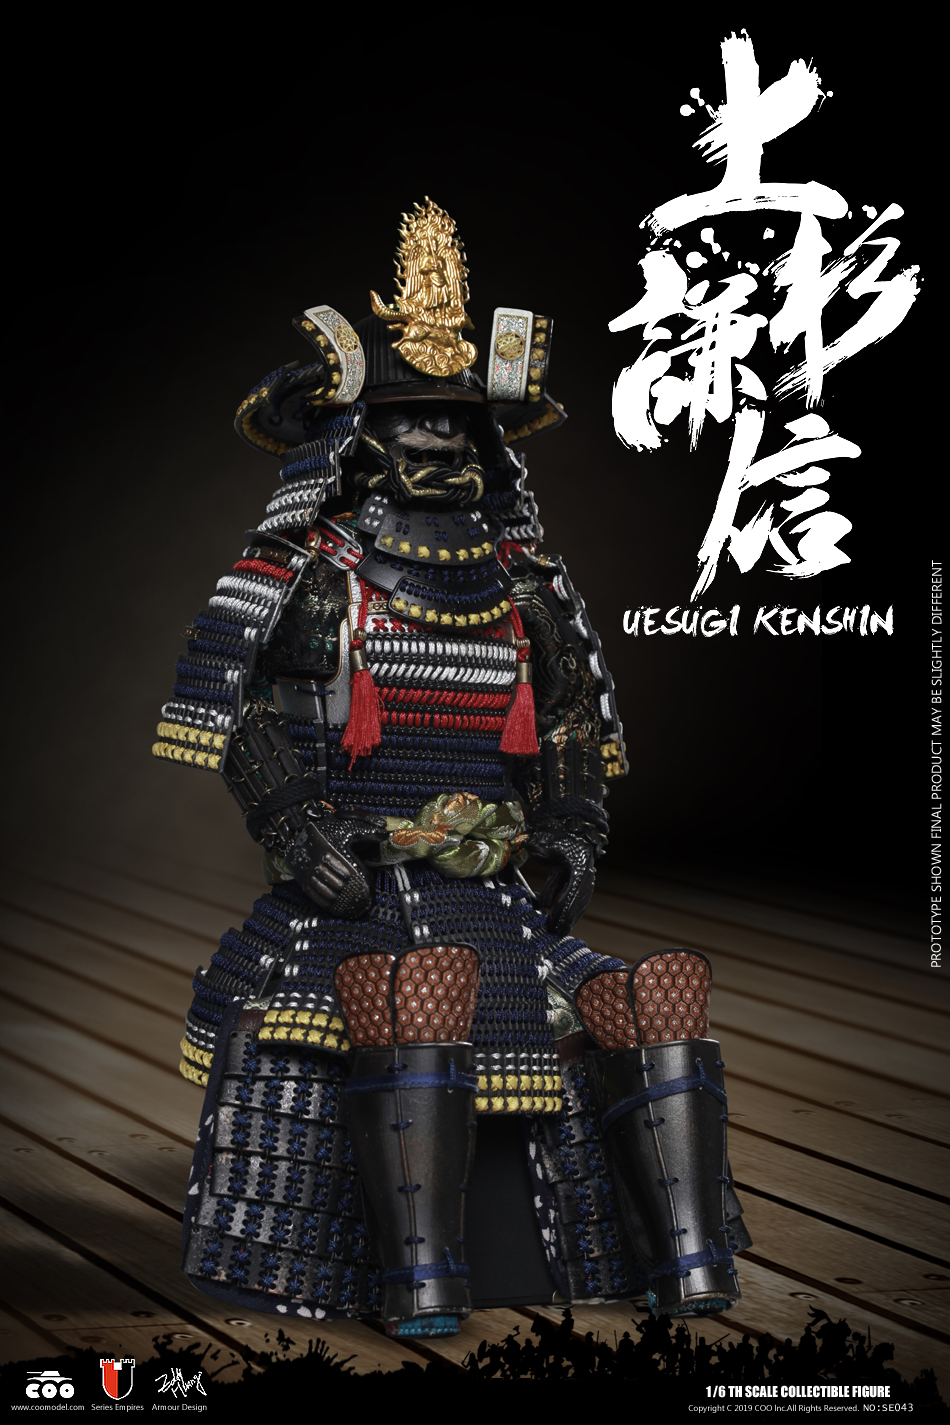 EmpireSeries - NEW PRODUCT: COOMODEL: 1/6 Empire Series (Die Casting Alloy) - Echigo's Dragon Uesugi Kenshin Standard Edition & Collector's Edition 19564211